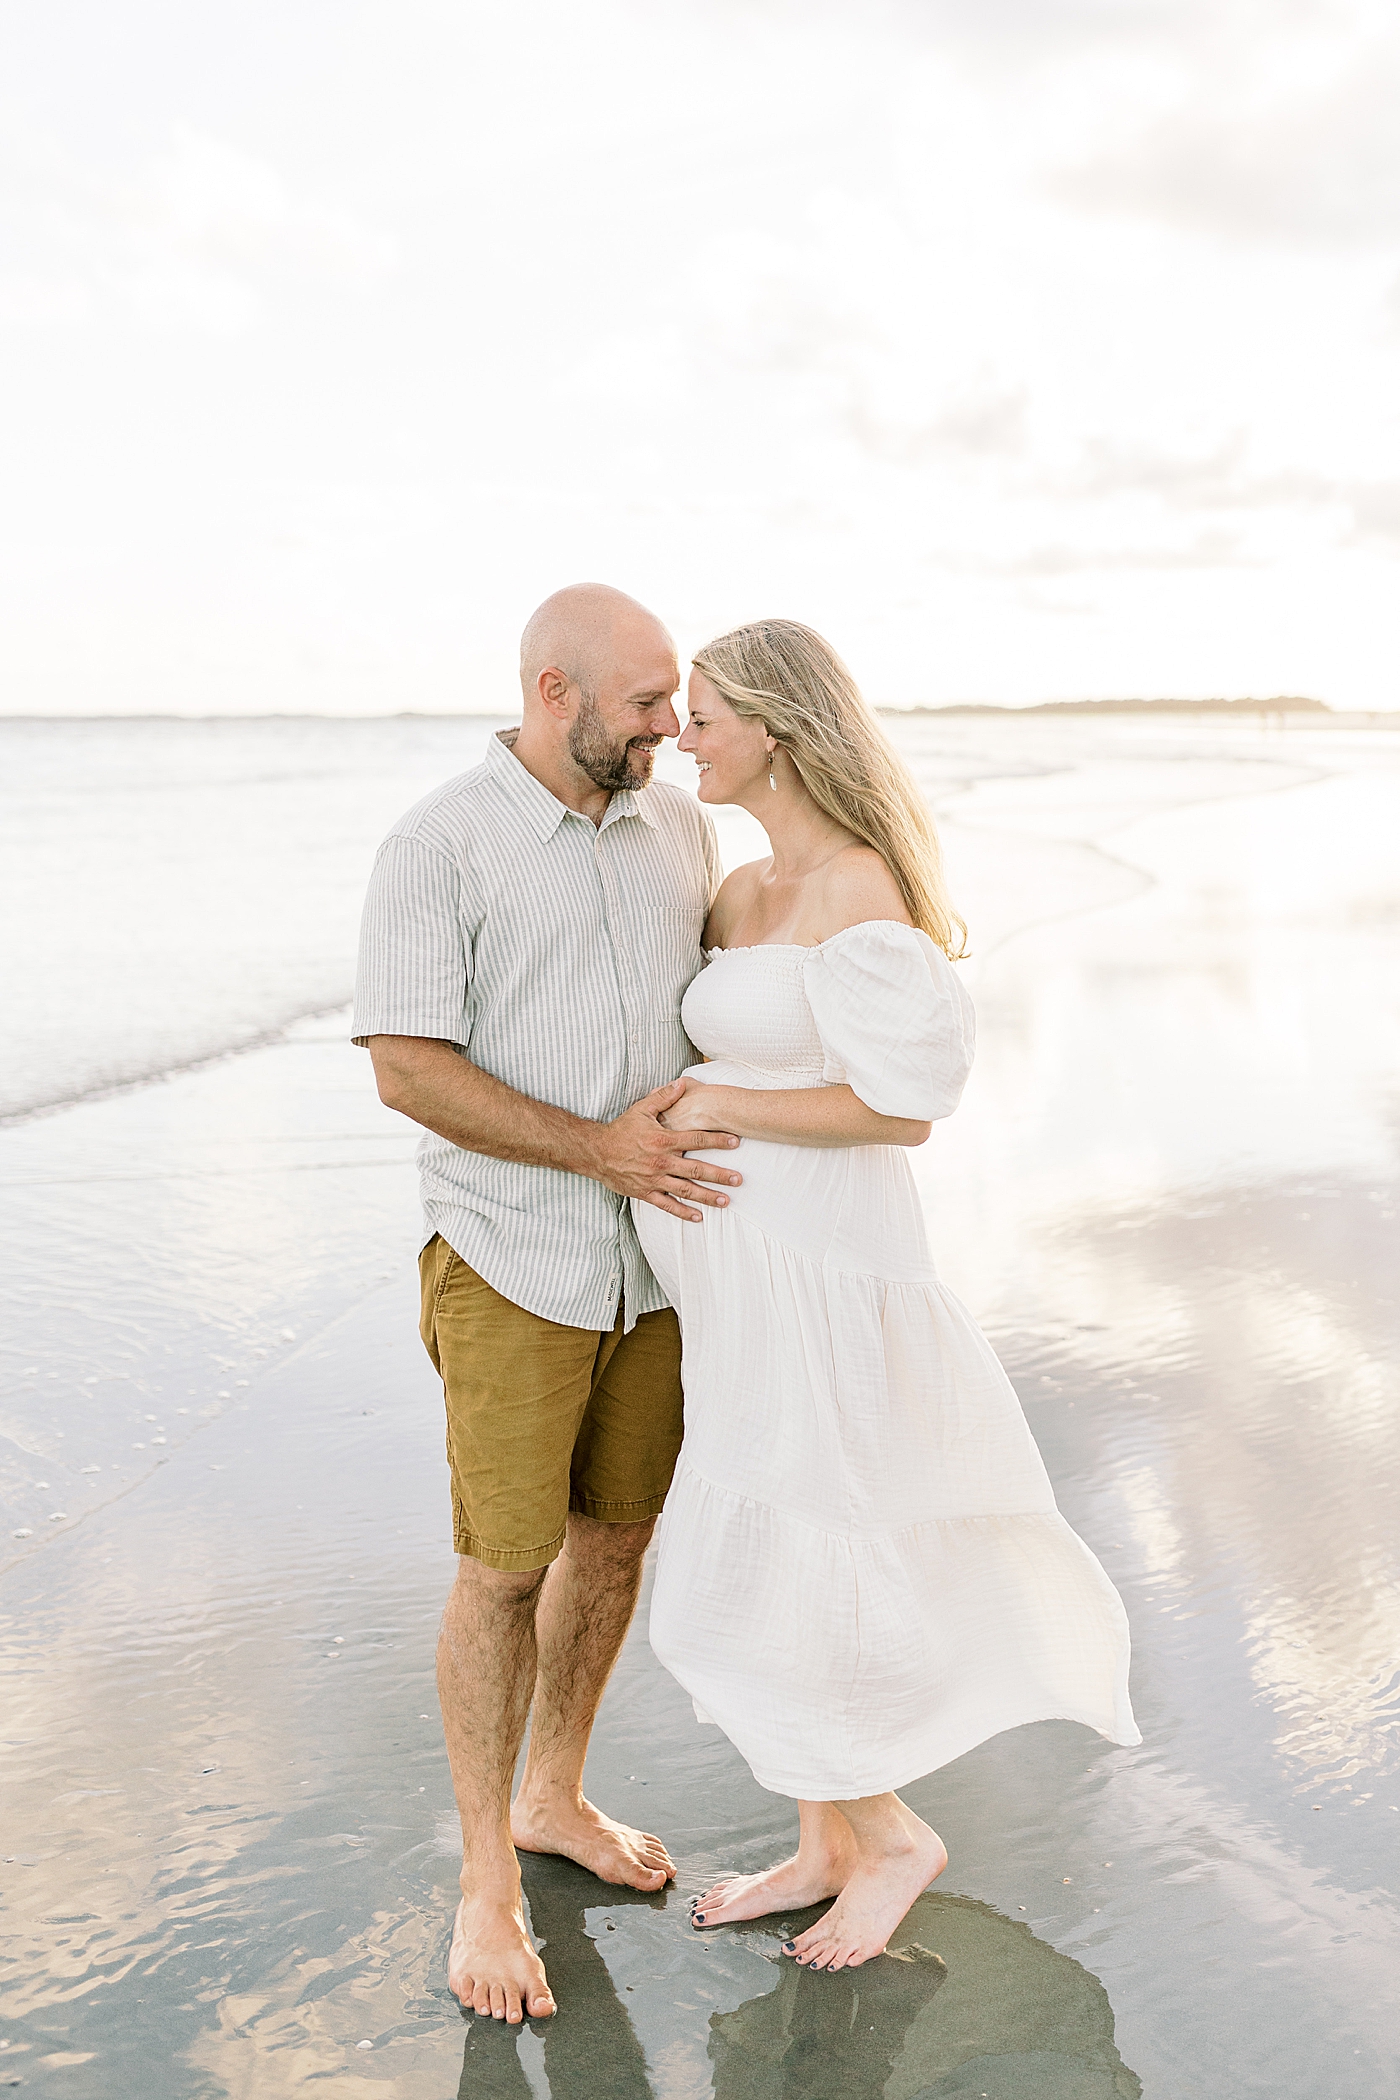 Mom and dad to be standing on the beach during their Maternity Session at Folly Beach | Image by Caitlyn Motycka